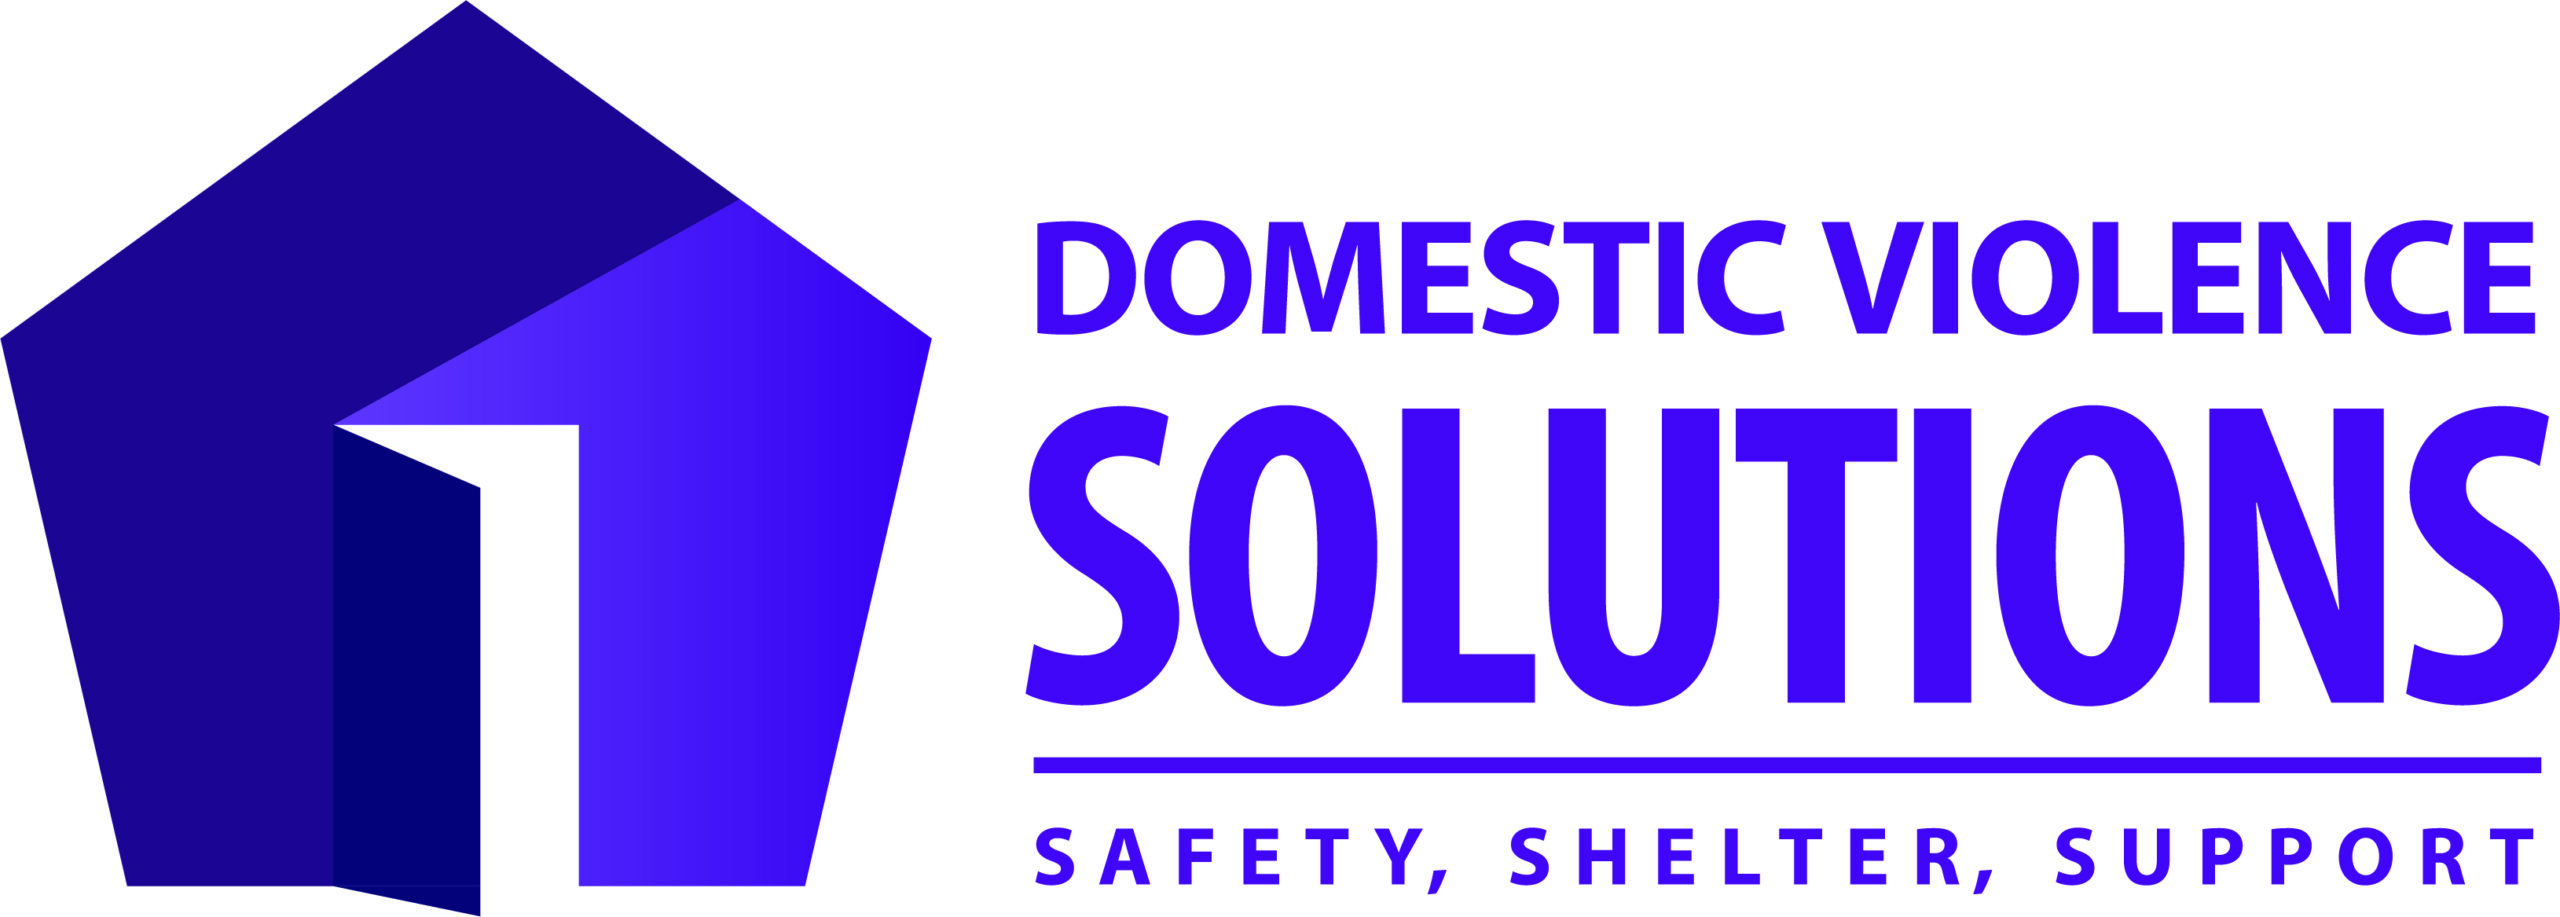 Domestic Violence Solutions logo with tagline: SAFETY, SHELTER, SUPPORT